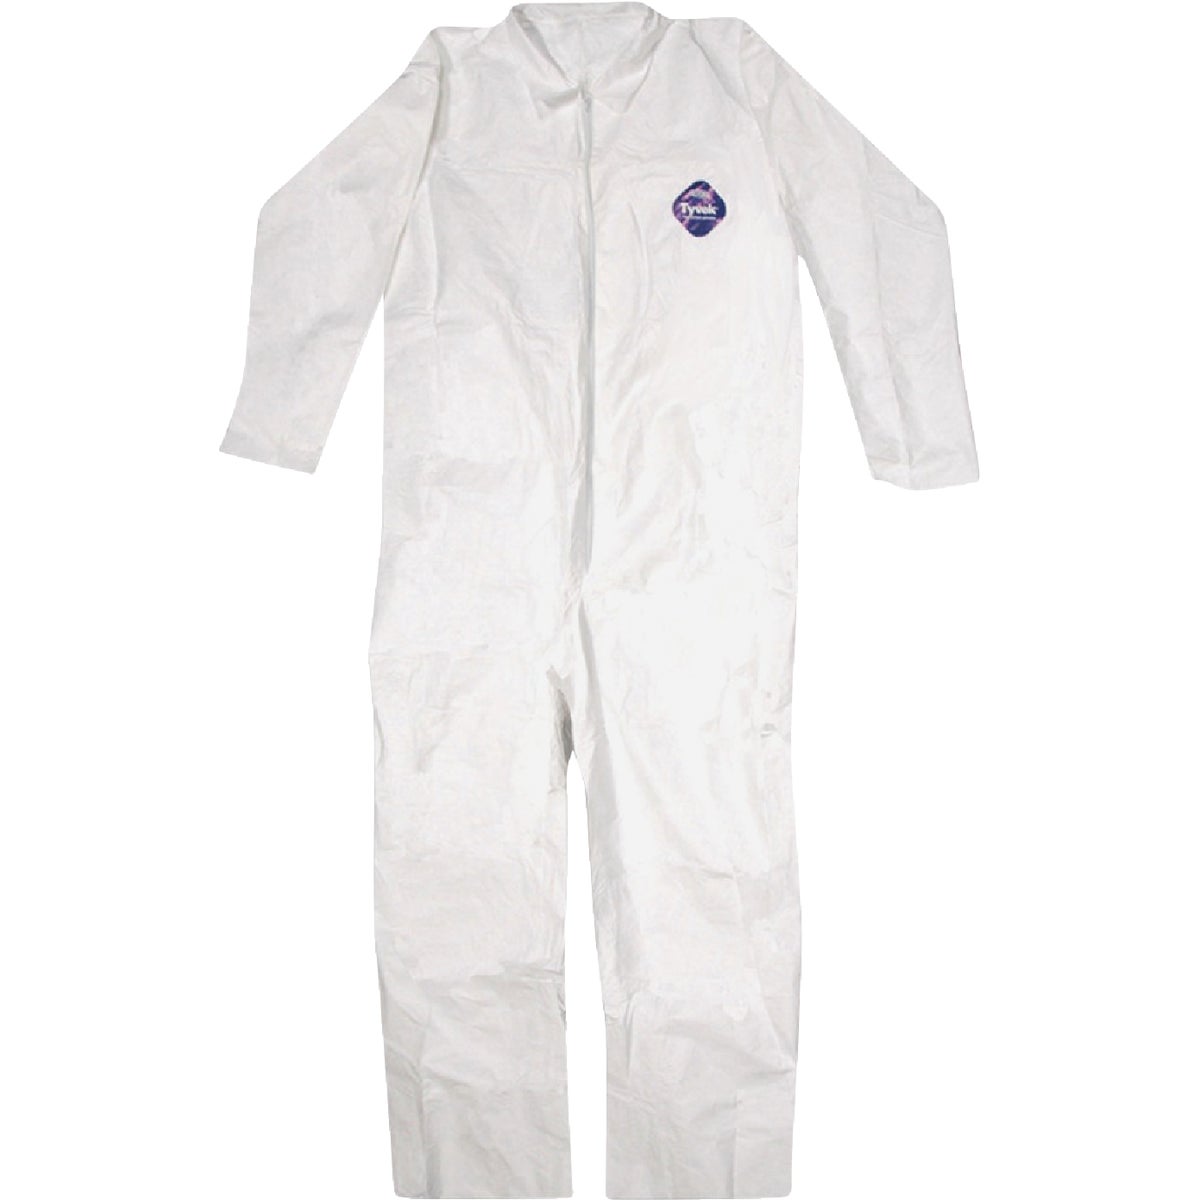 Painter's Coveralls